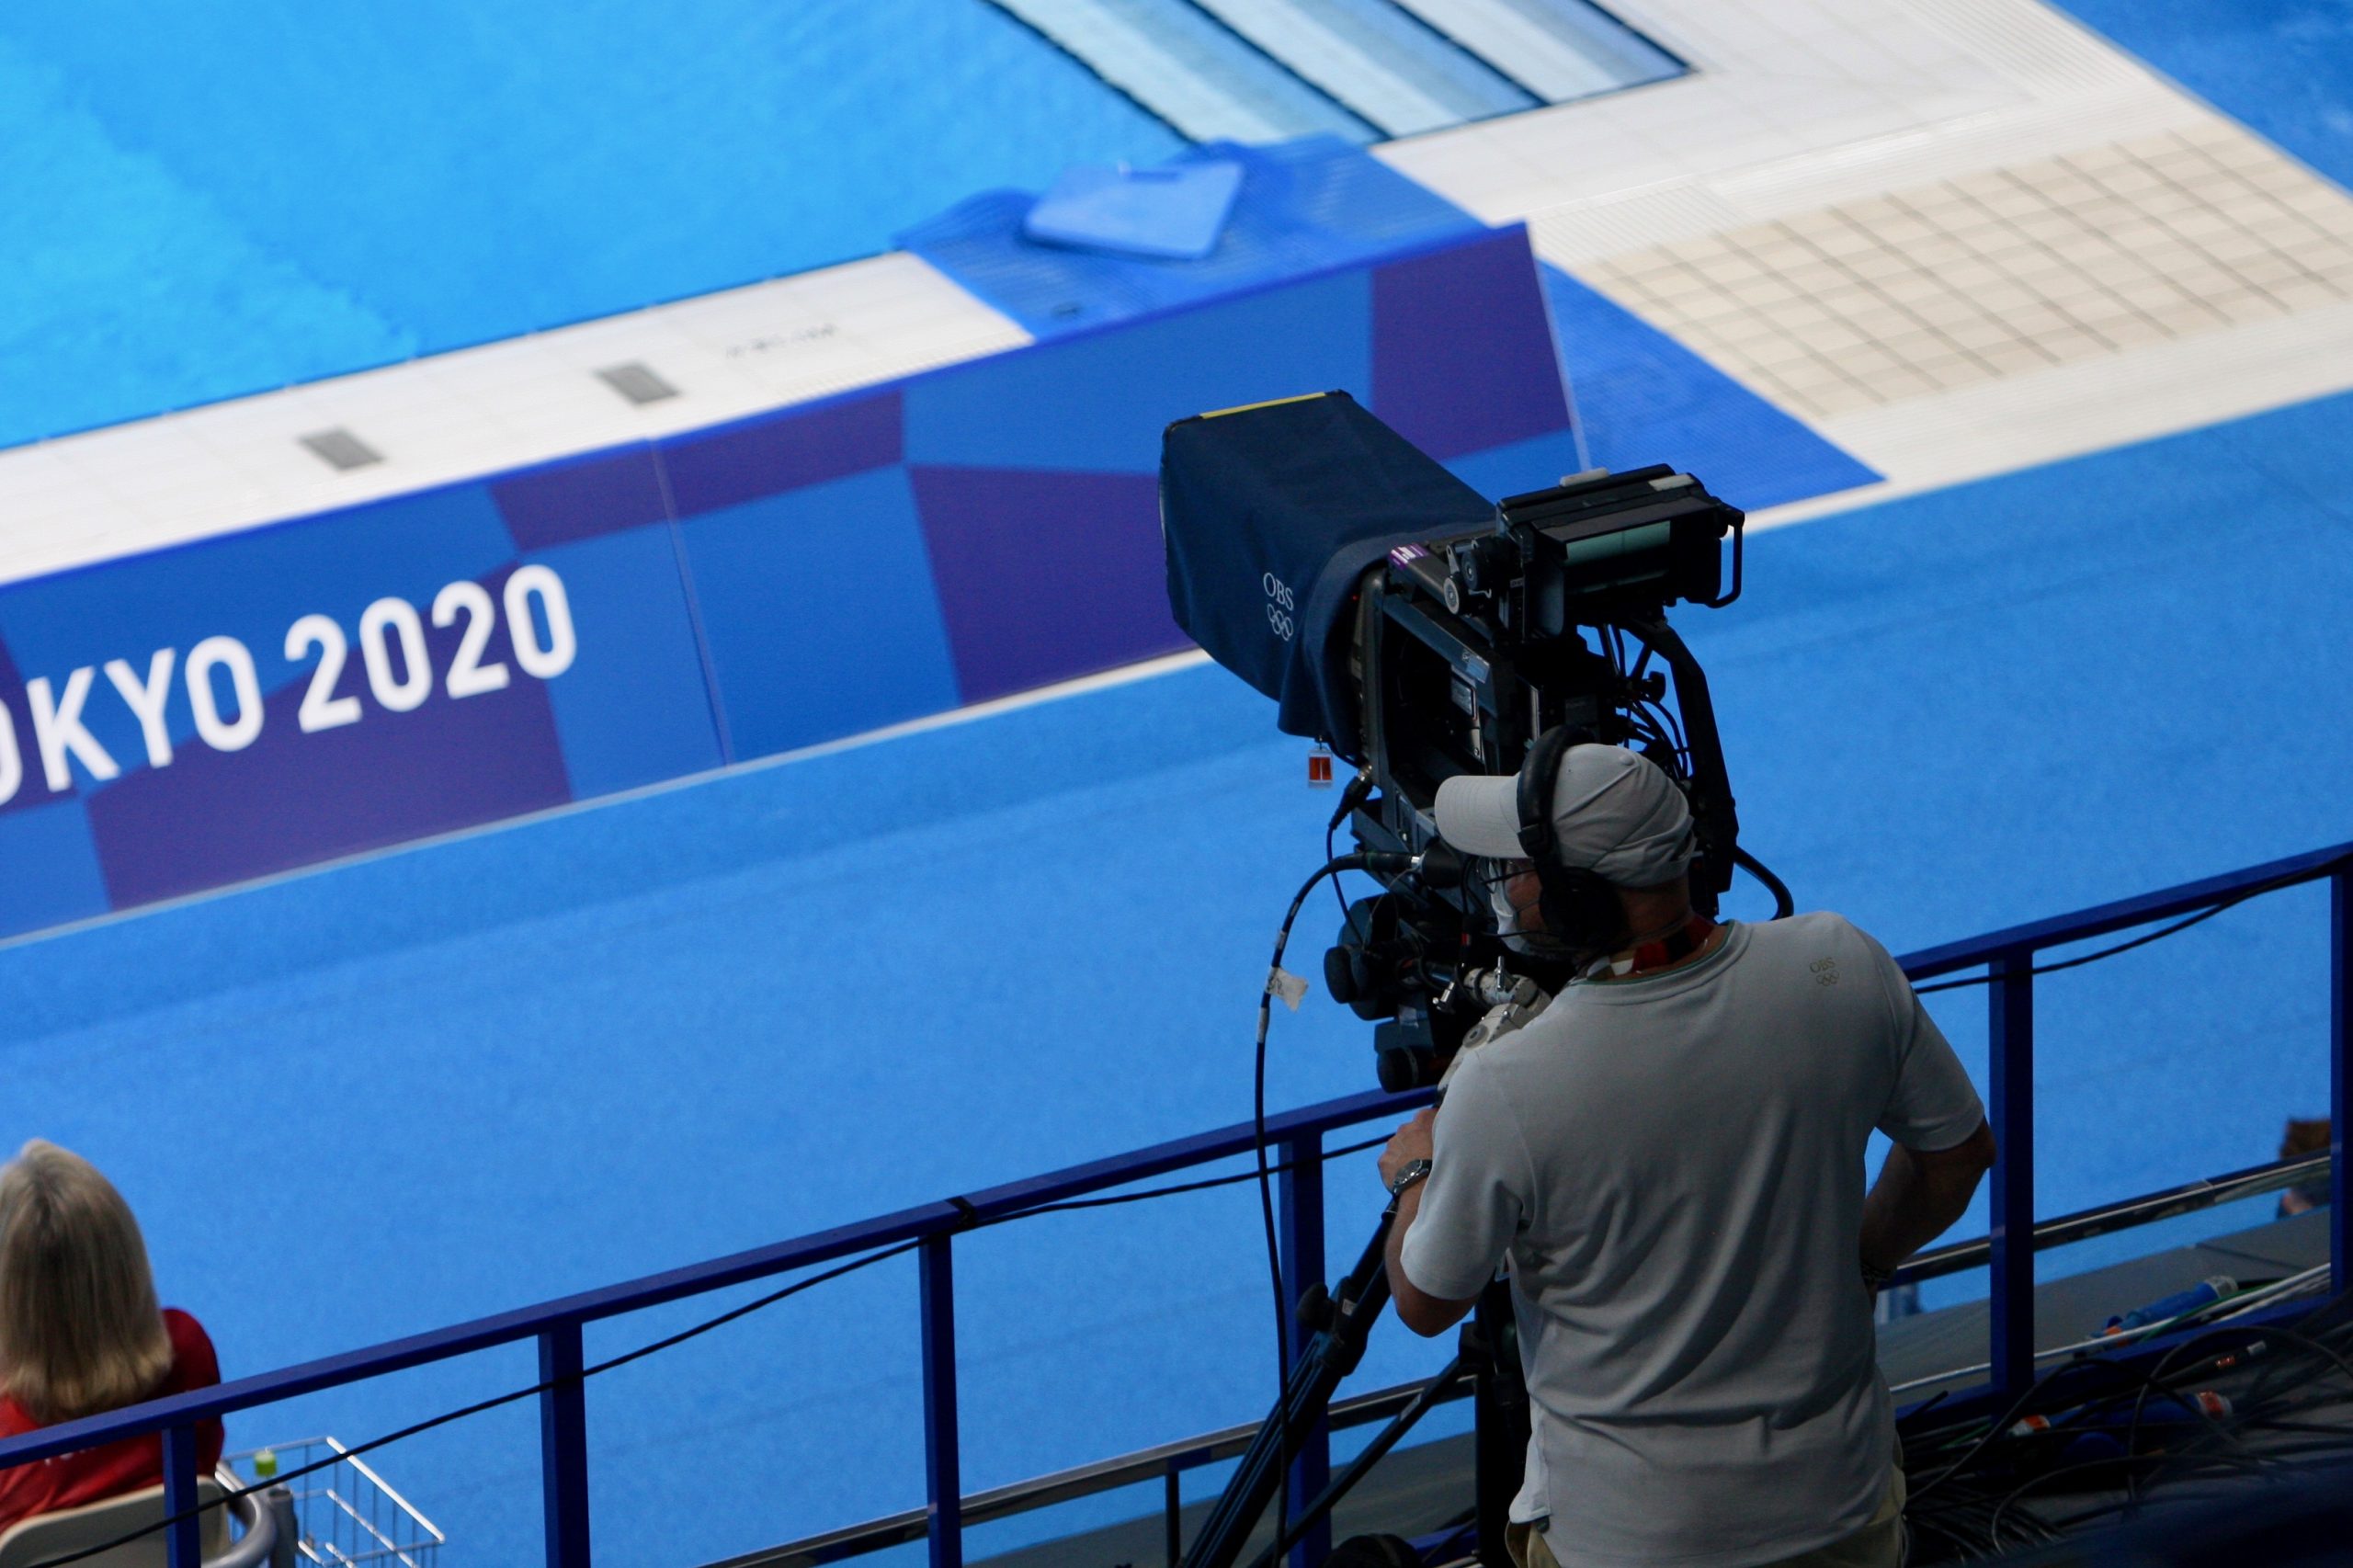 Live From Tokyo Olympics Diving at the Tokyo Aquatics Center Photo Gallery